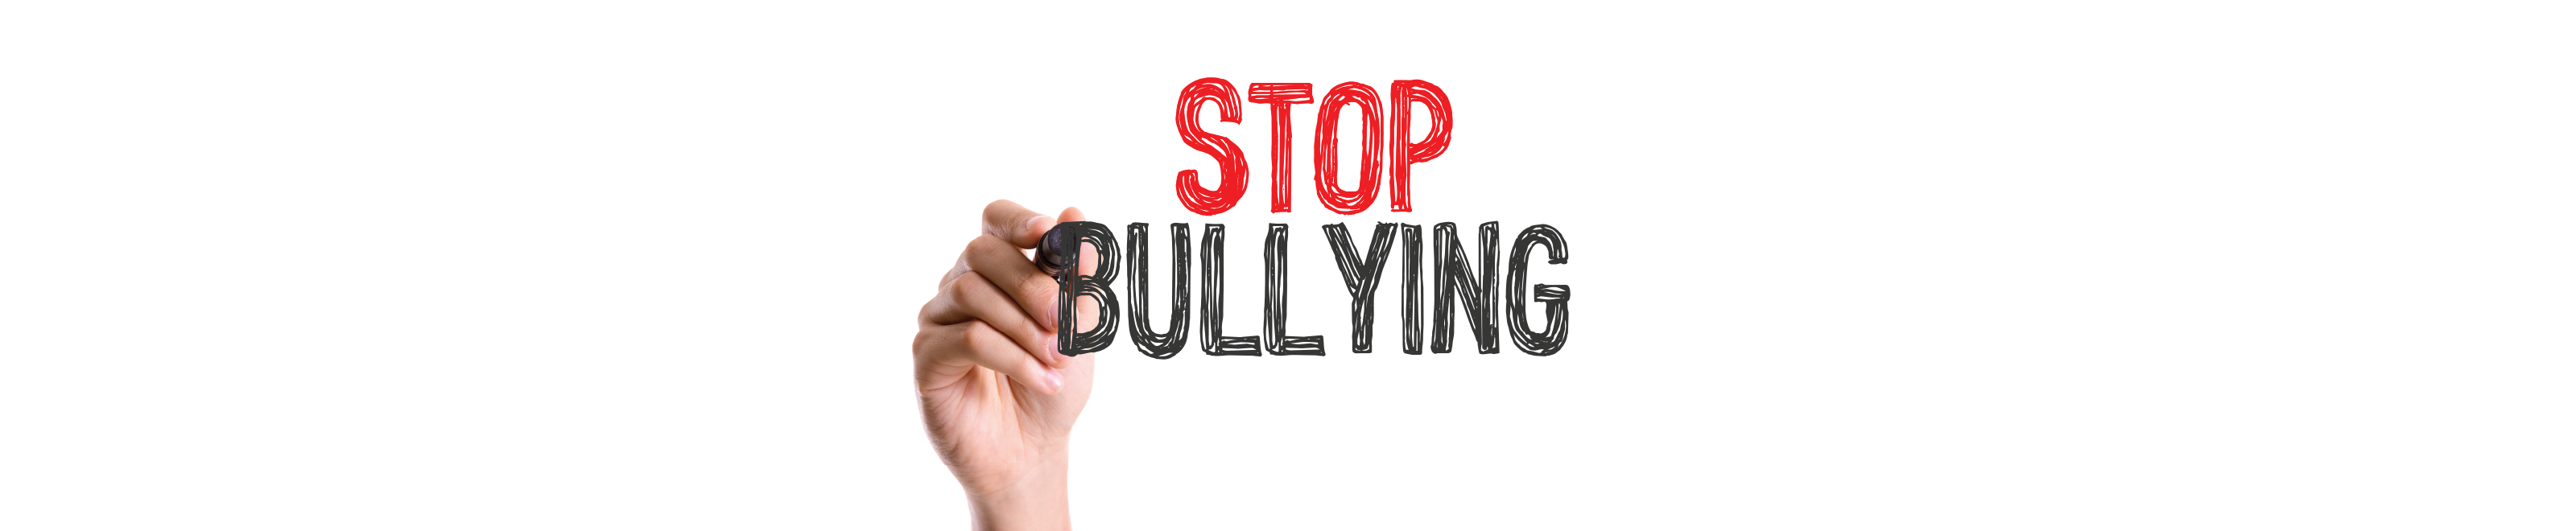 An image of a hand writing on a whiteboard - Stop Bullying